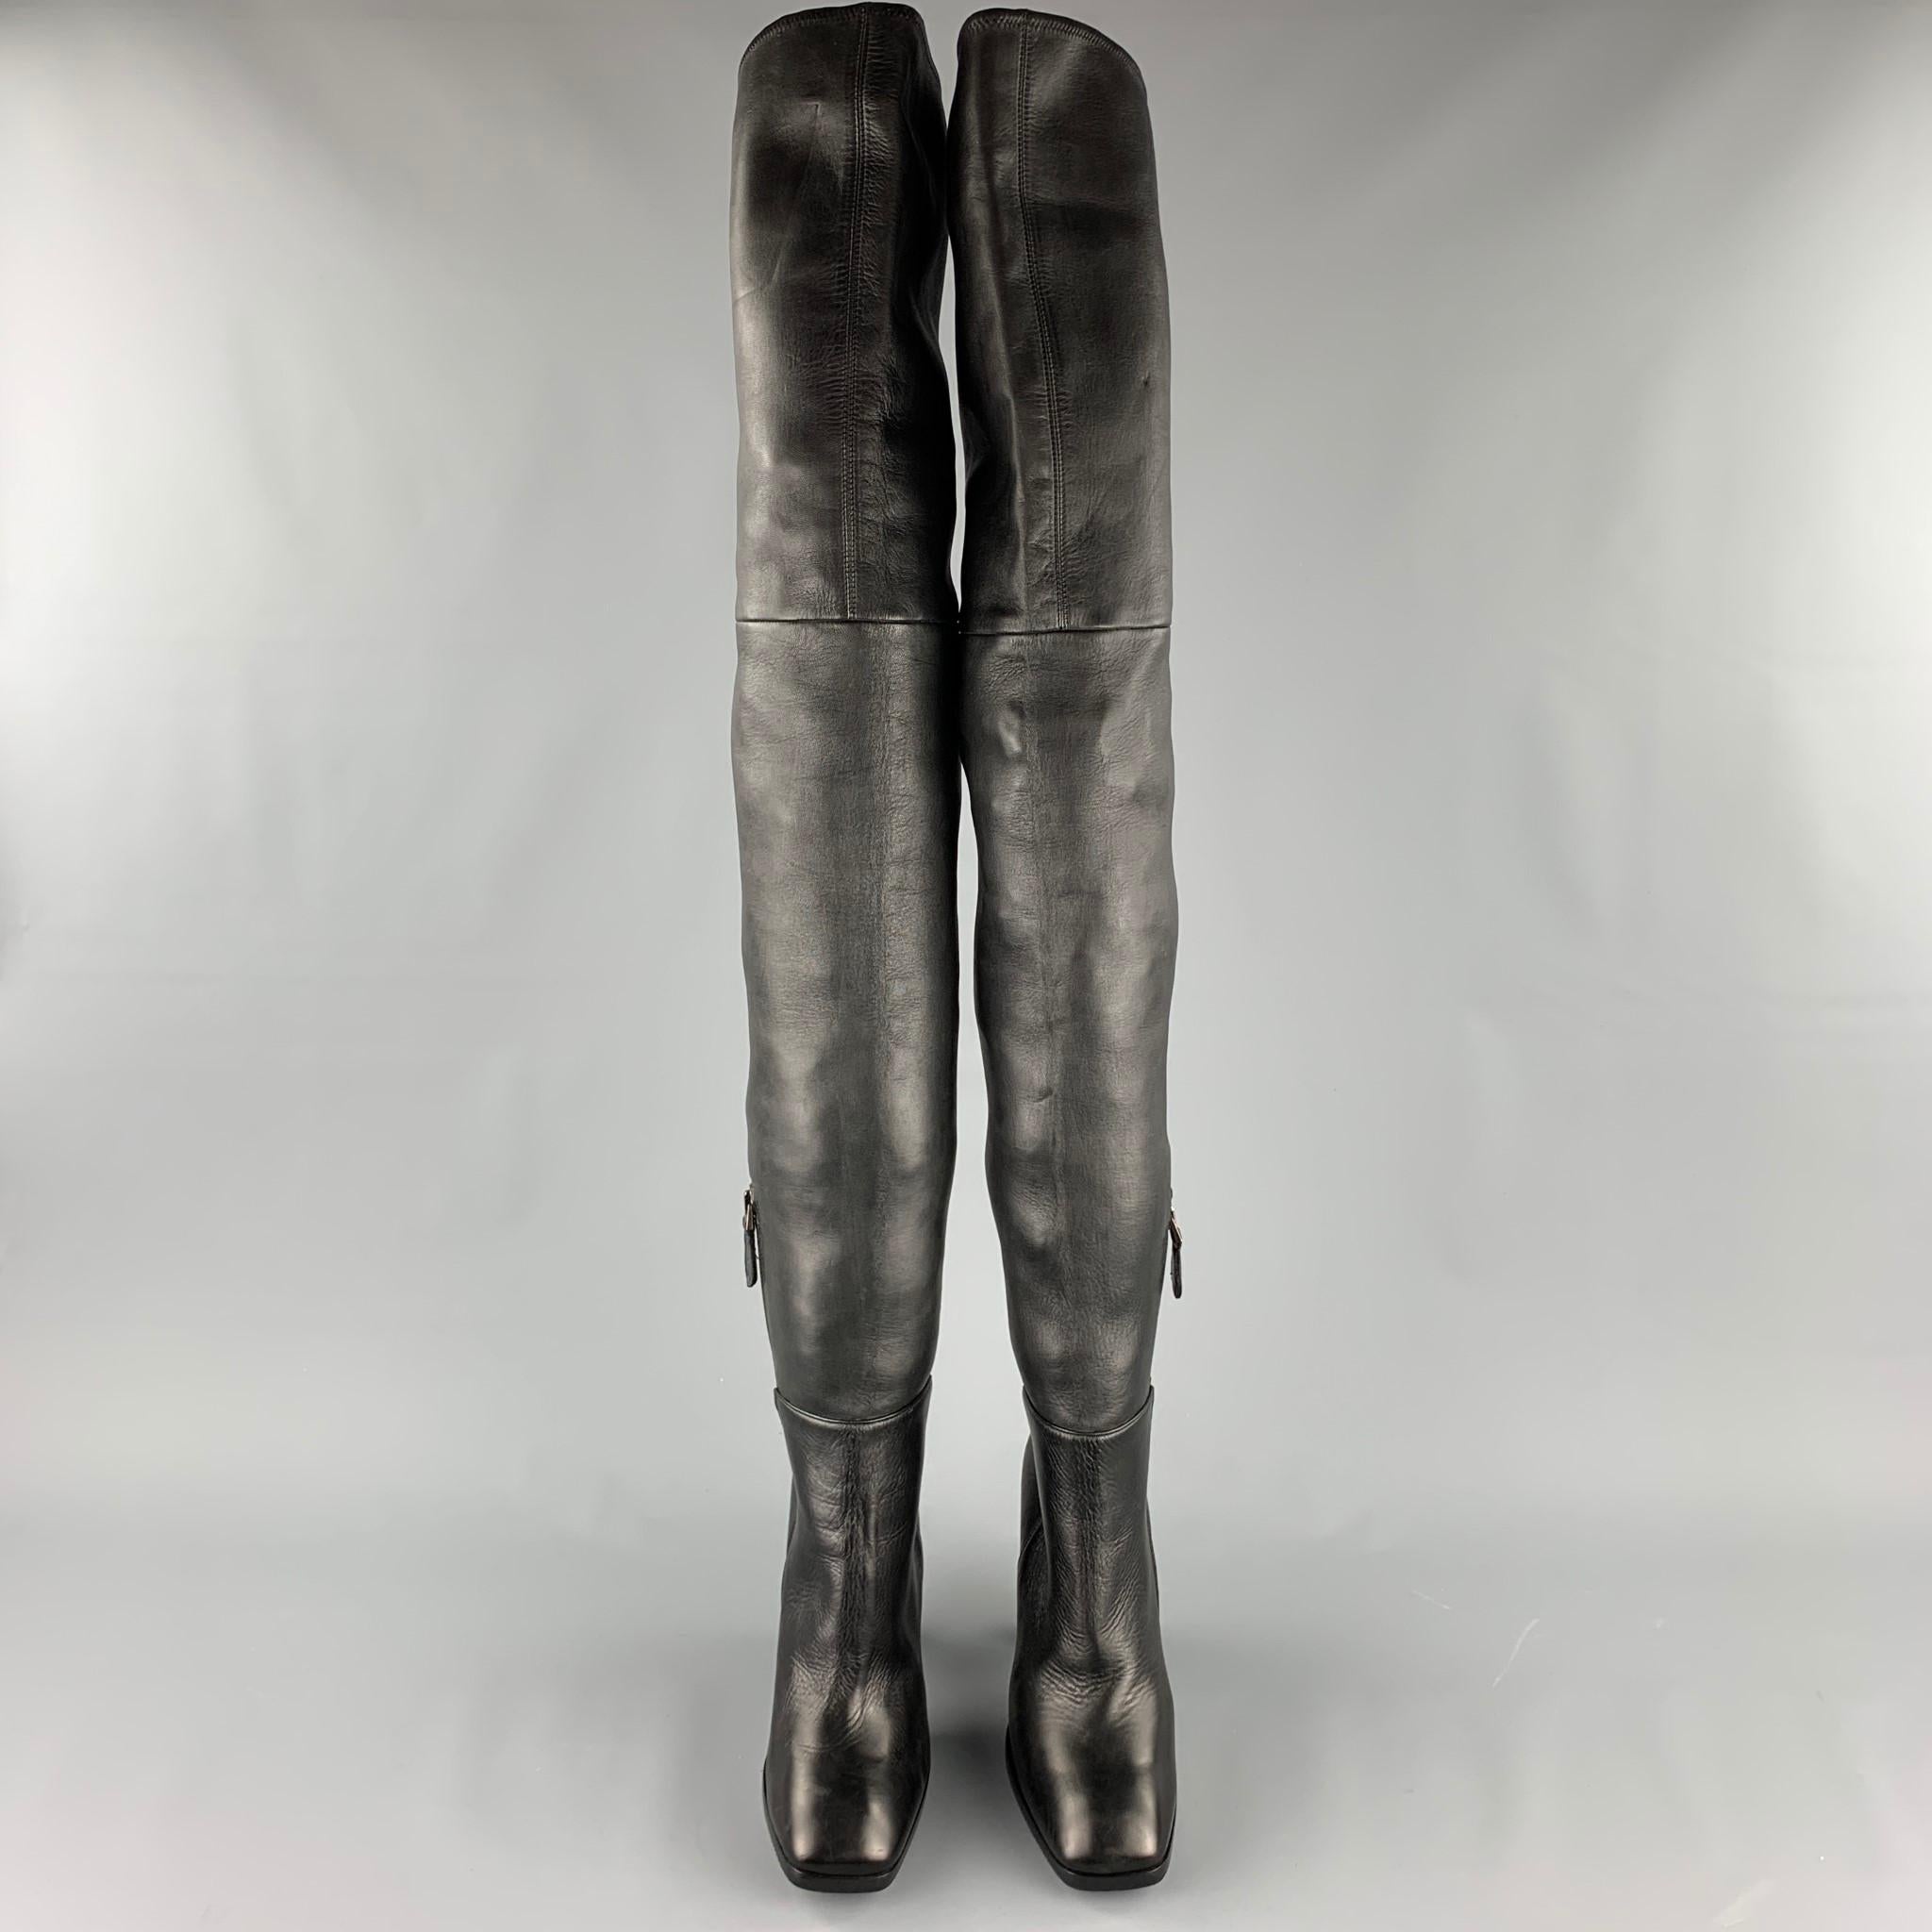 ALAIA boots comes in a black leather featuring a over the knee style, chunky heel, wooden sole, and a side zipper closure. Made in Italy. 

New Without Tags. 
Marked: EU 40
Original Retail Price: $1,750.00

Measurements:

Length: 8.5 in.
Width: 3